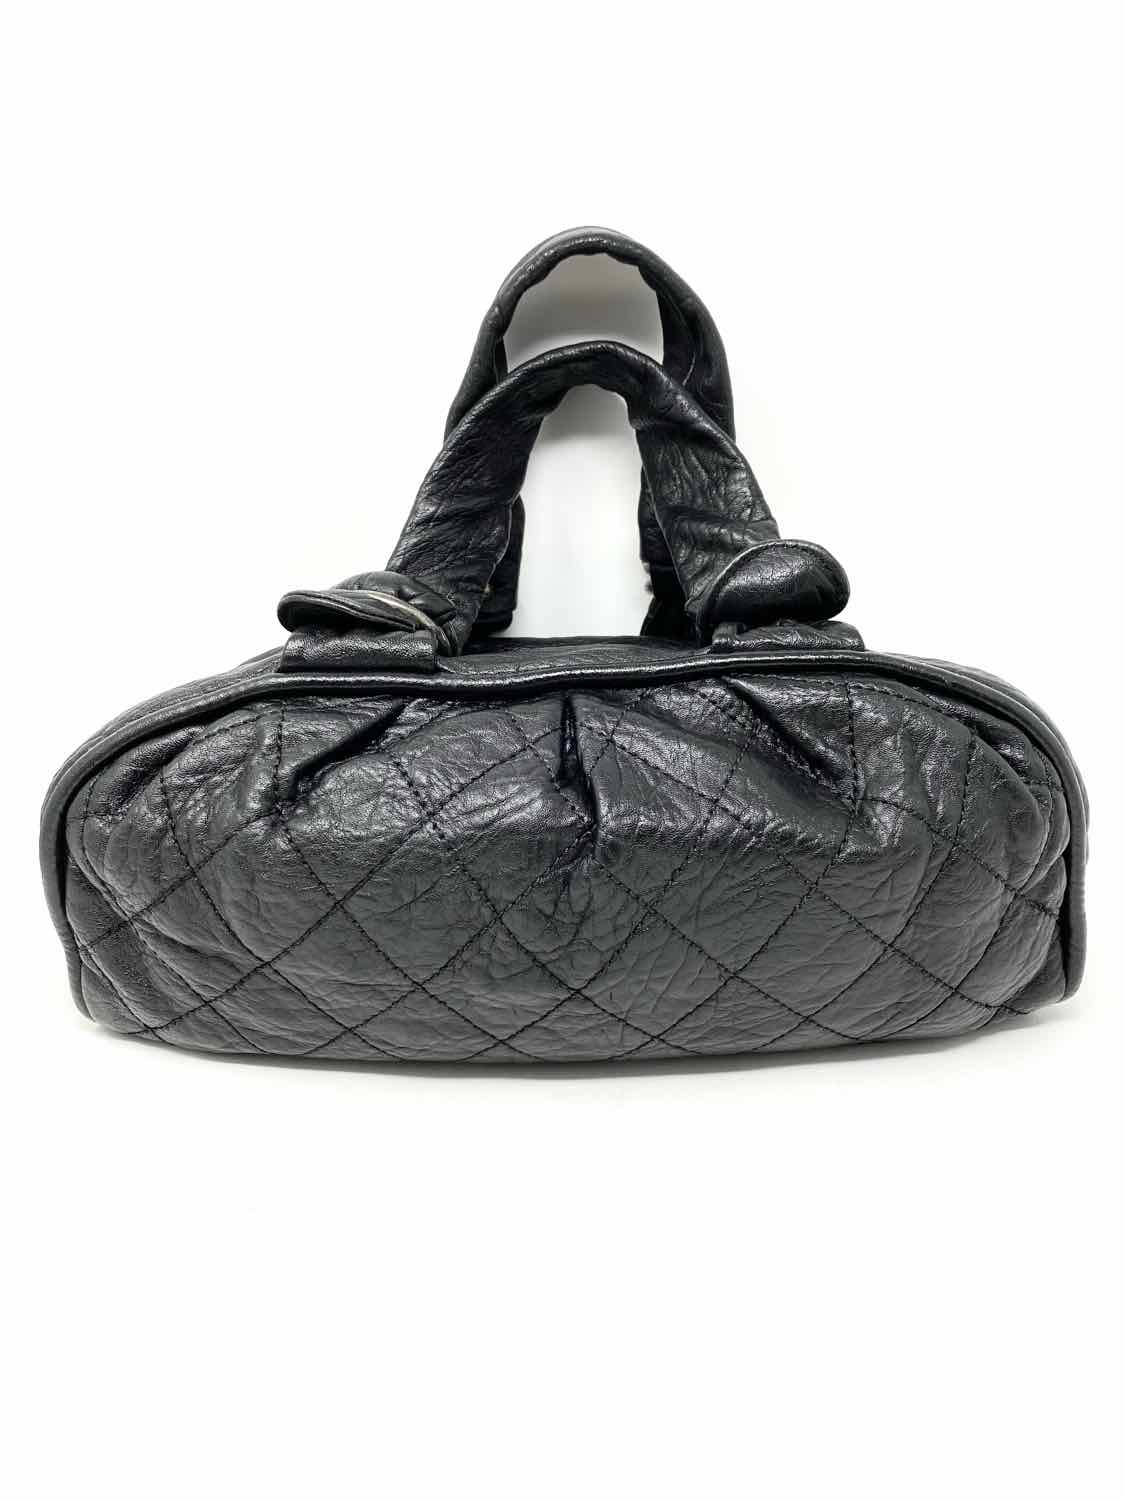 Chanel 2006/08 Soft Quilted Bowling Bag CC Zip Black Satchel